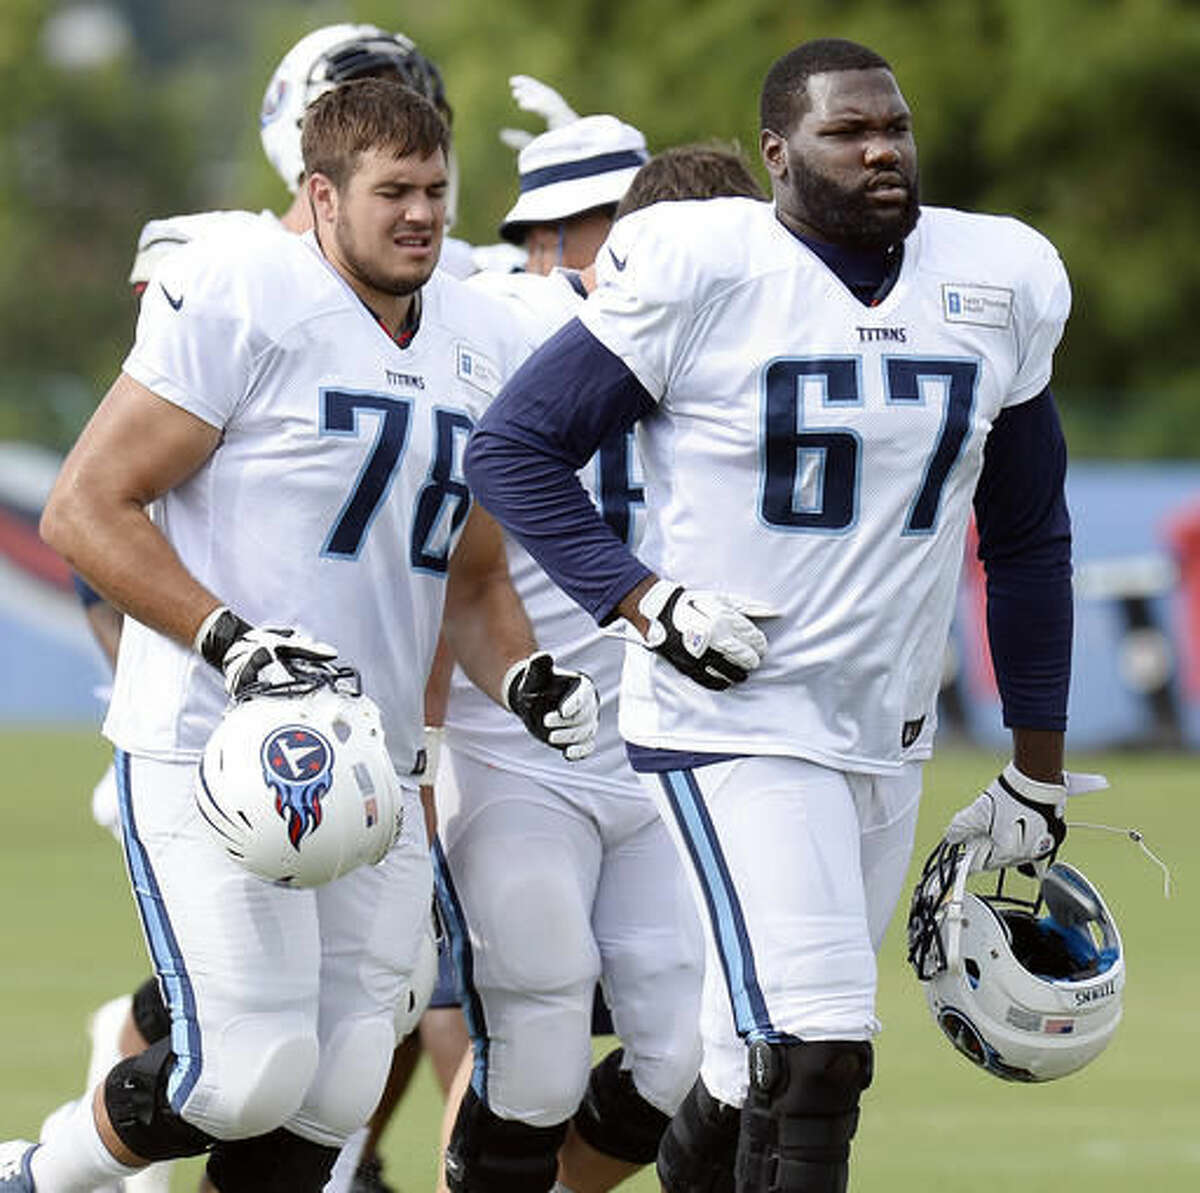 Tennessee Titans offensive tackle Jack Conklin (78) and offensive guard Quinton Spain (67) run off the field after a drill during NFL football training camp Thursday, Aug. 4, 2016, in Nashville, Tenn. (AP Photo/Mark Zaleski)